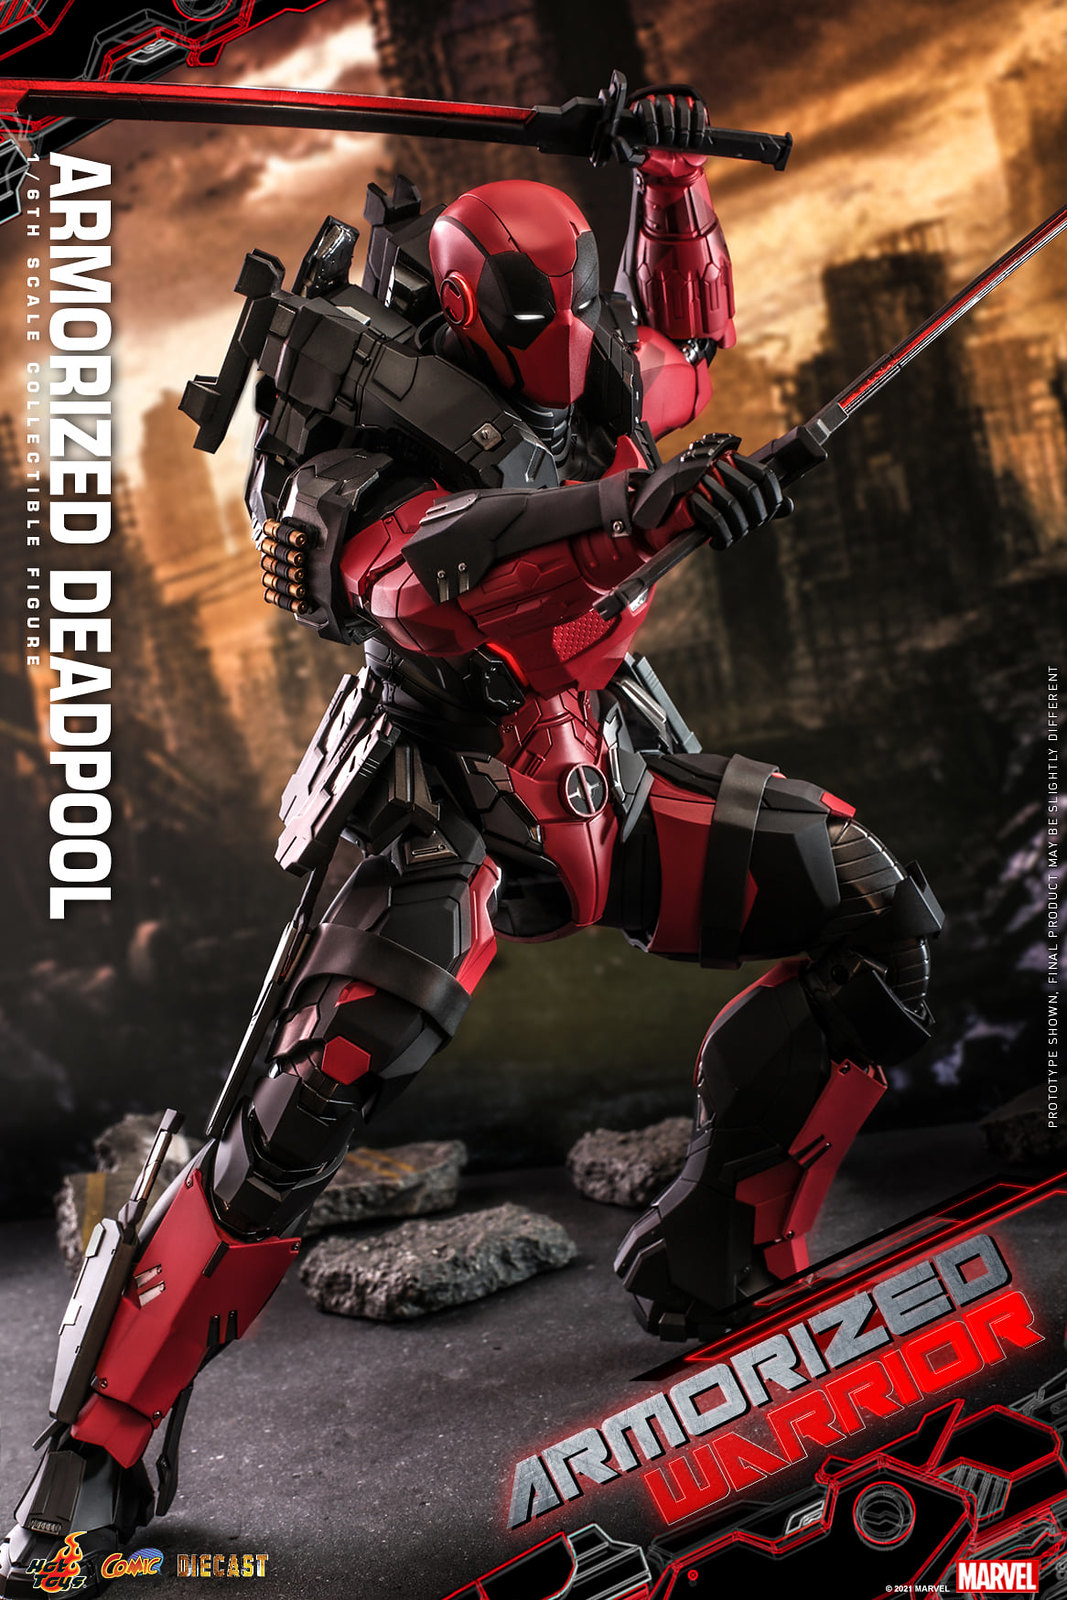 NEW PRODUCT: Hot Toys Armorized Warrior - 1/6th scale Armorized Deadpool Collectible Figure [Armorized Warrior Collection] 51312242925_cb4563850f_h